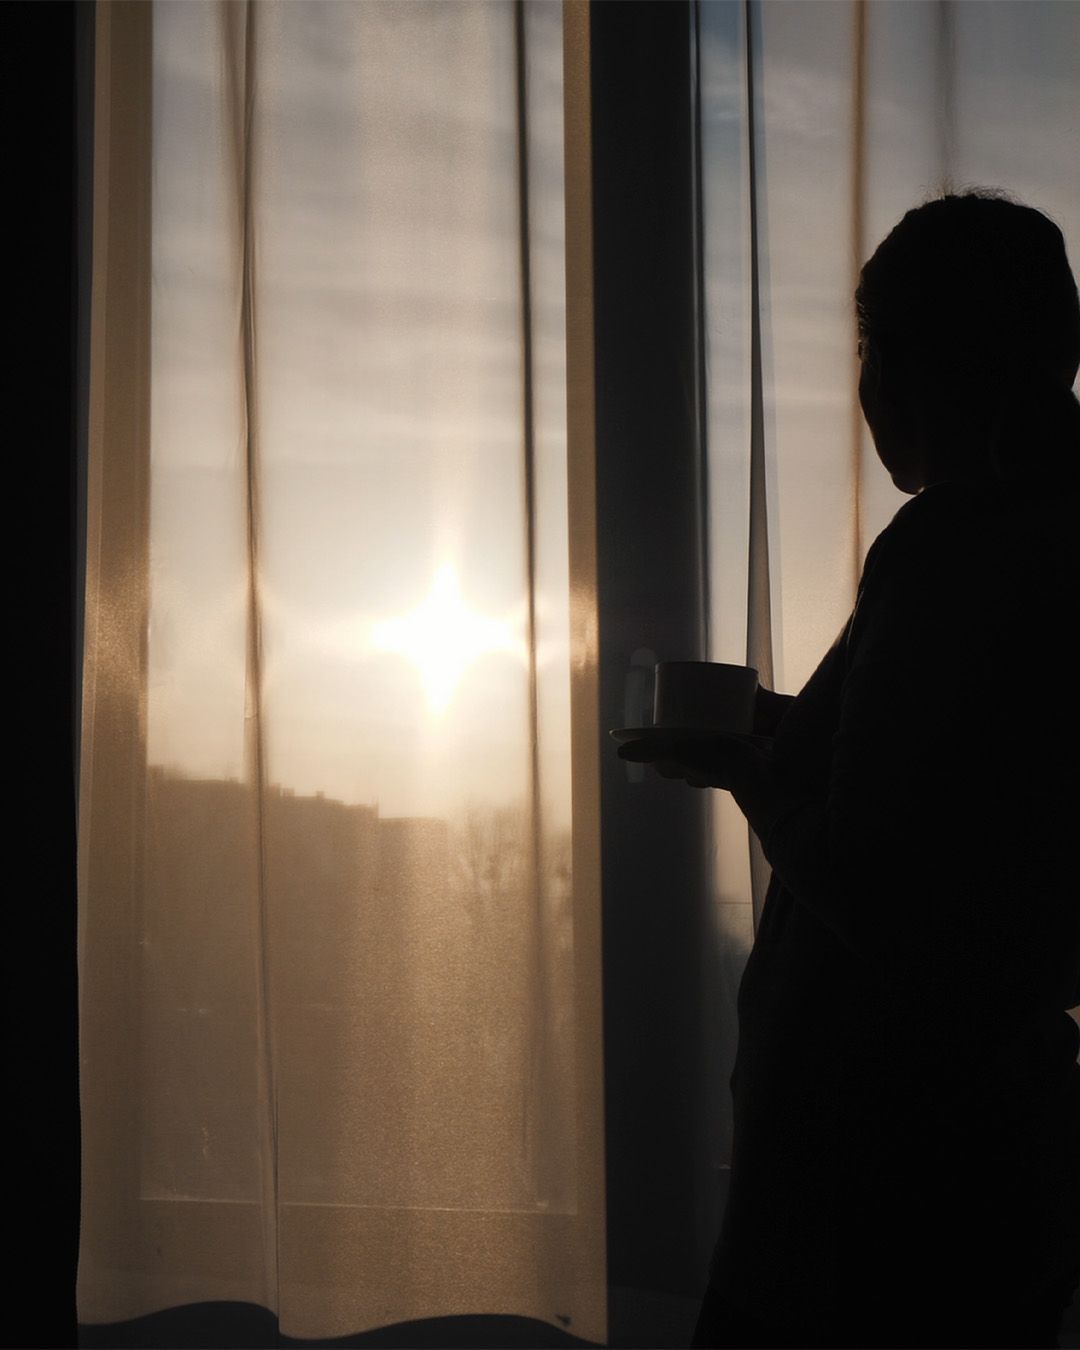 A silhouette of a person standing in front of a window with the sun shining through the curtains